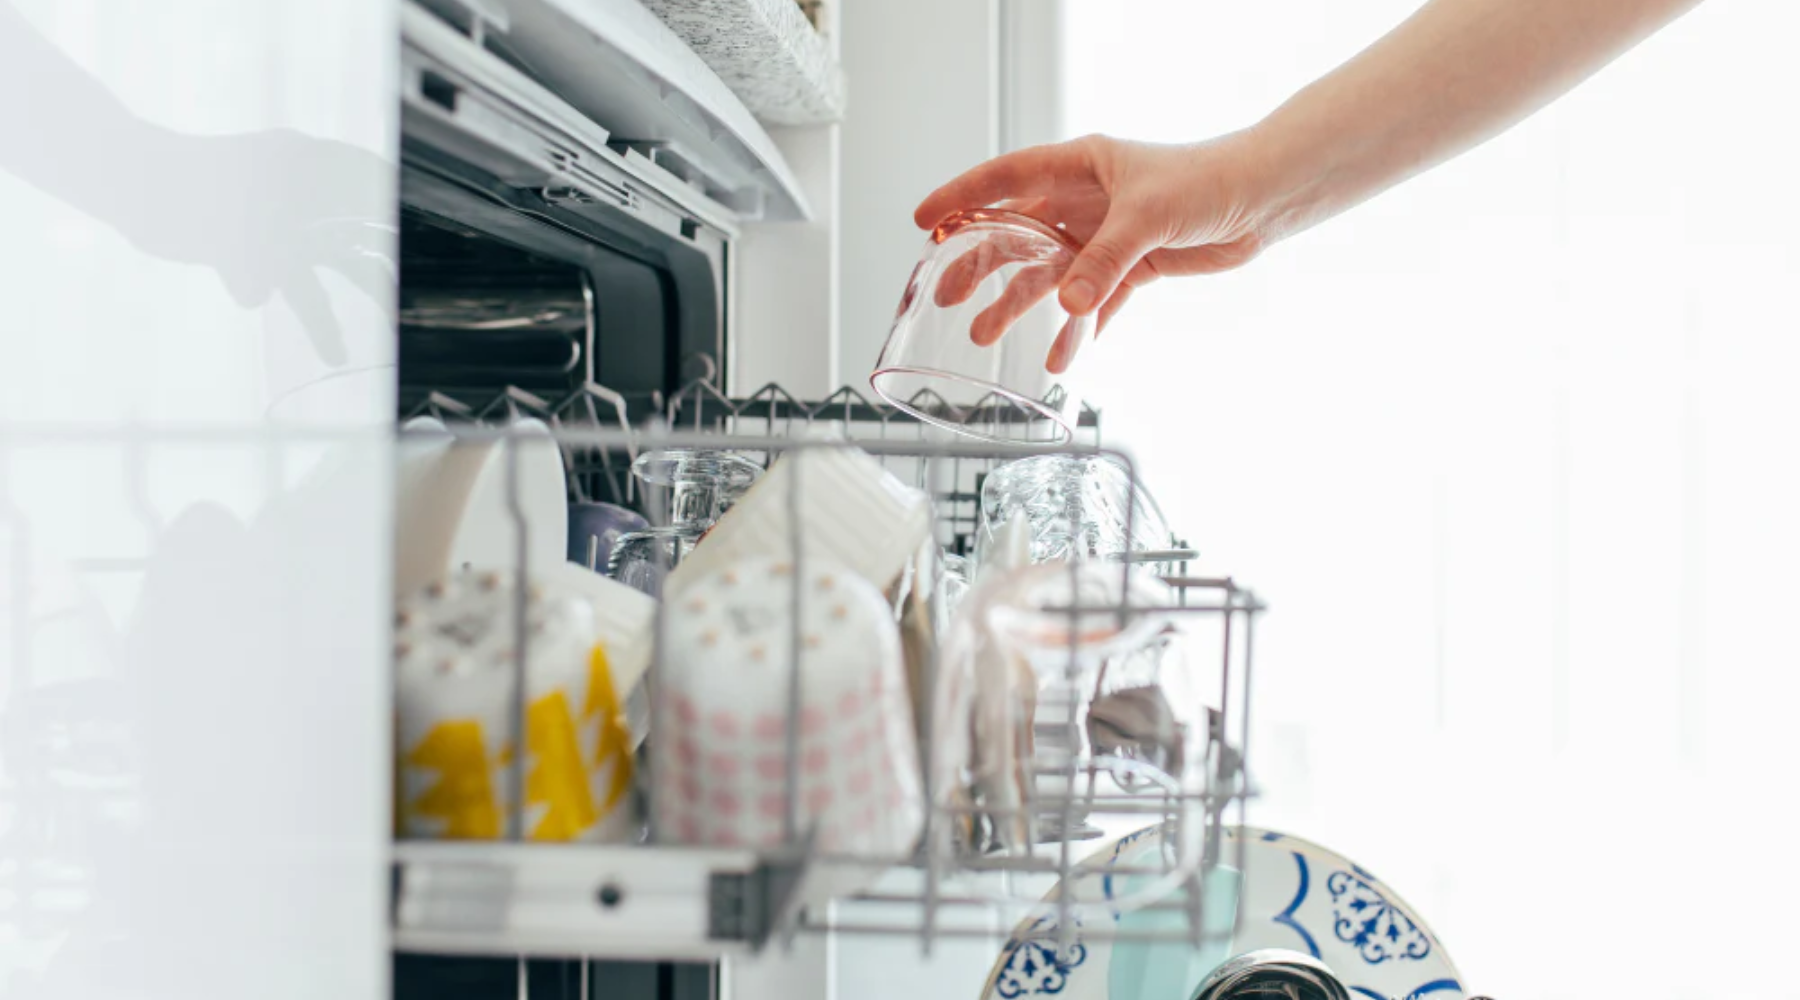 THE ULTIMATE DISHWASHER GUIDE